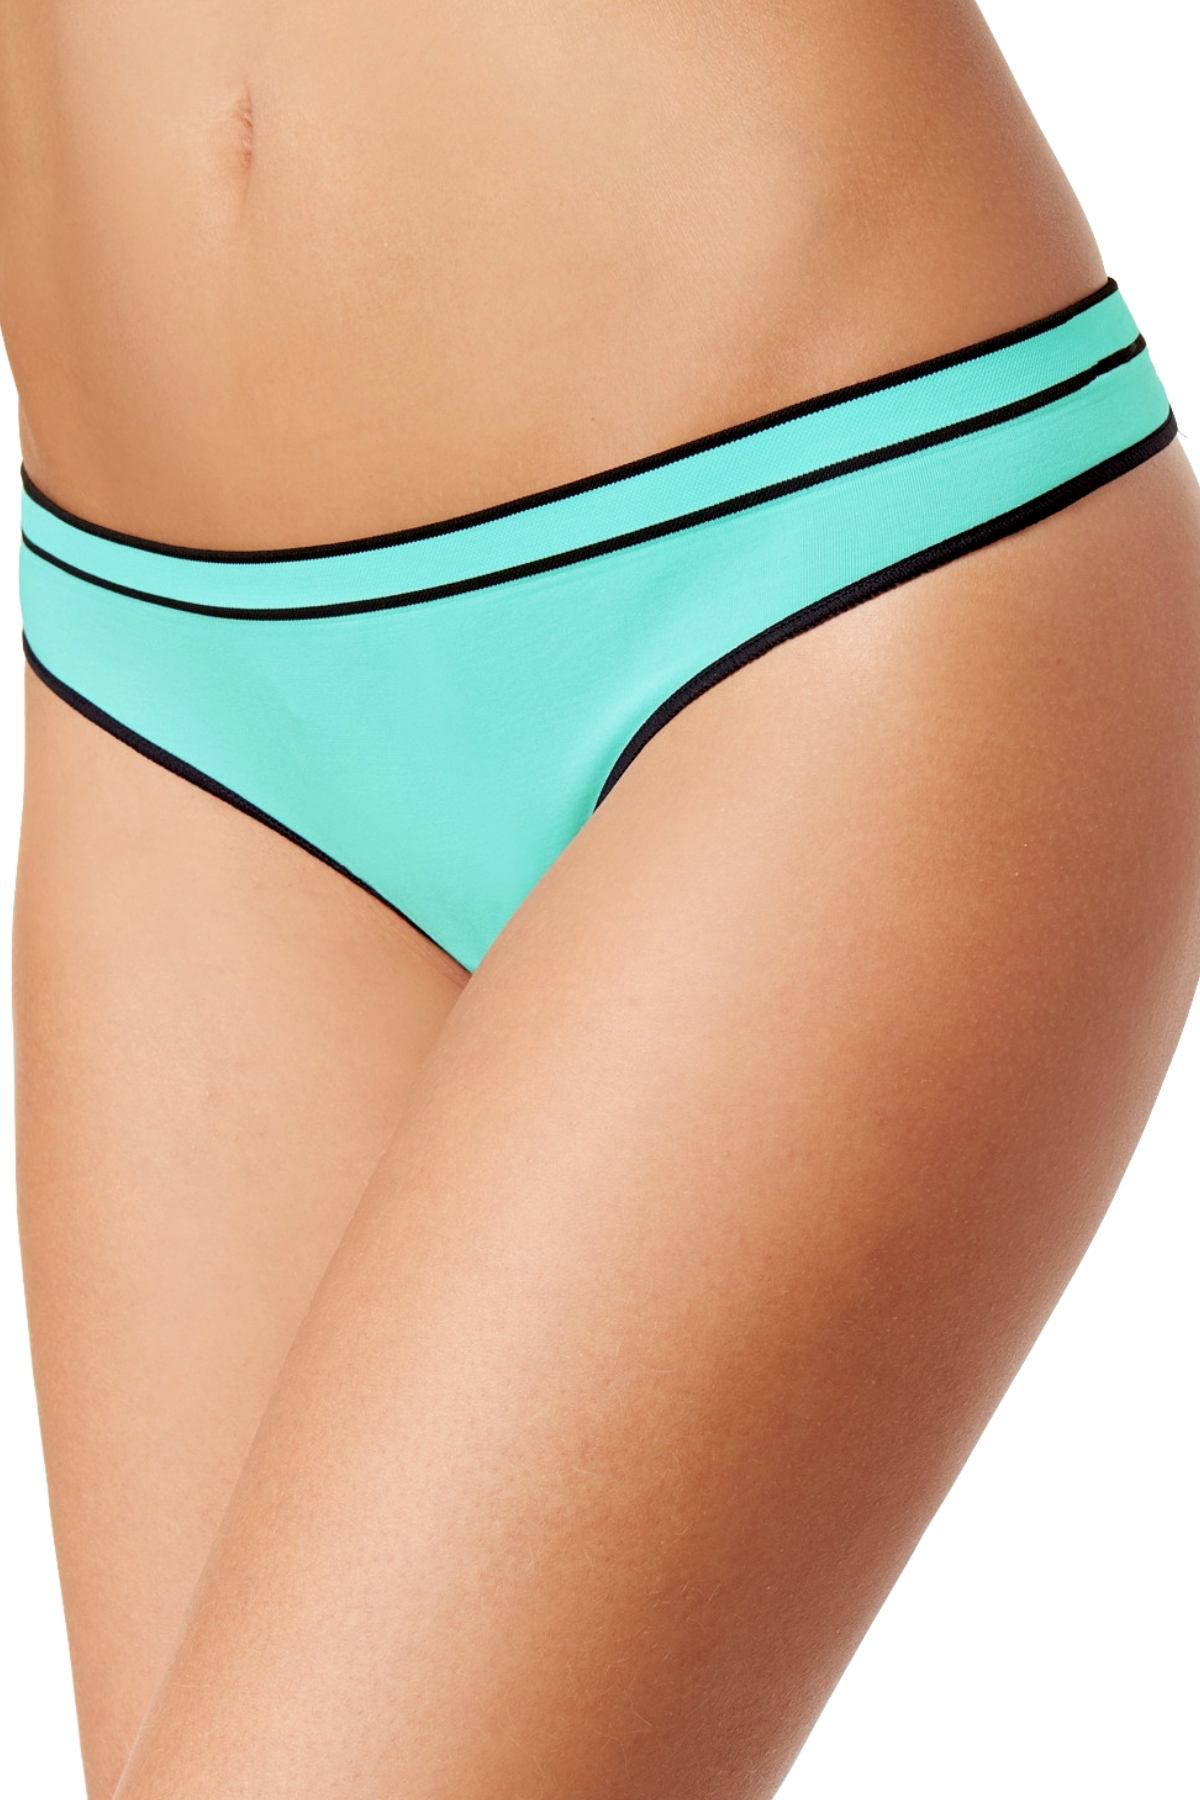 Jenni PLUS Lace Thong in Excite Mint – CheapUndies